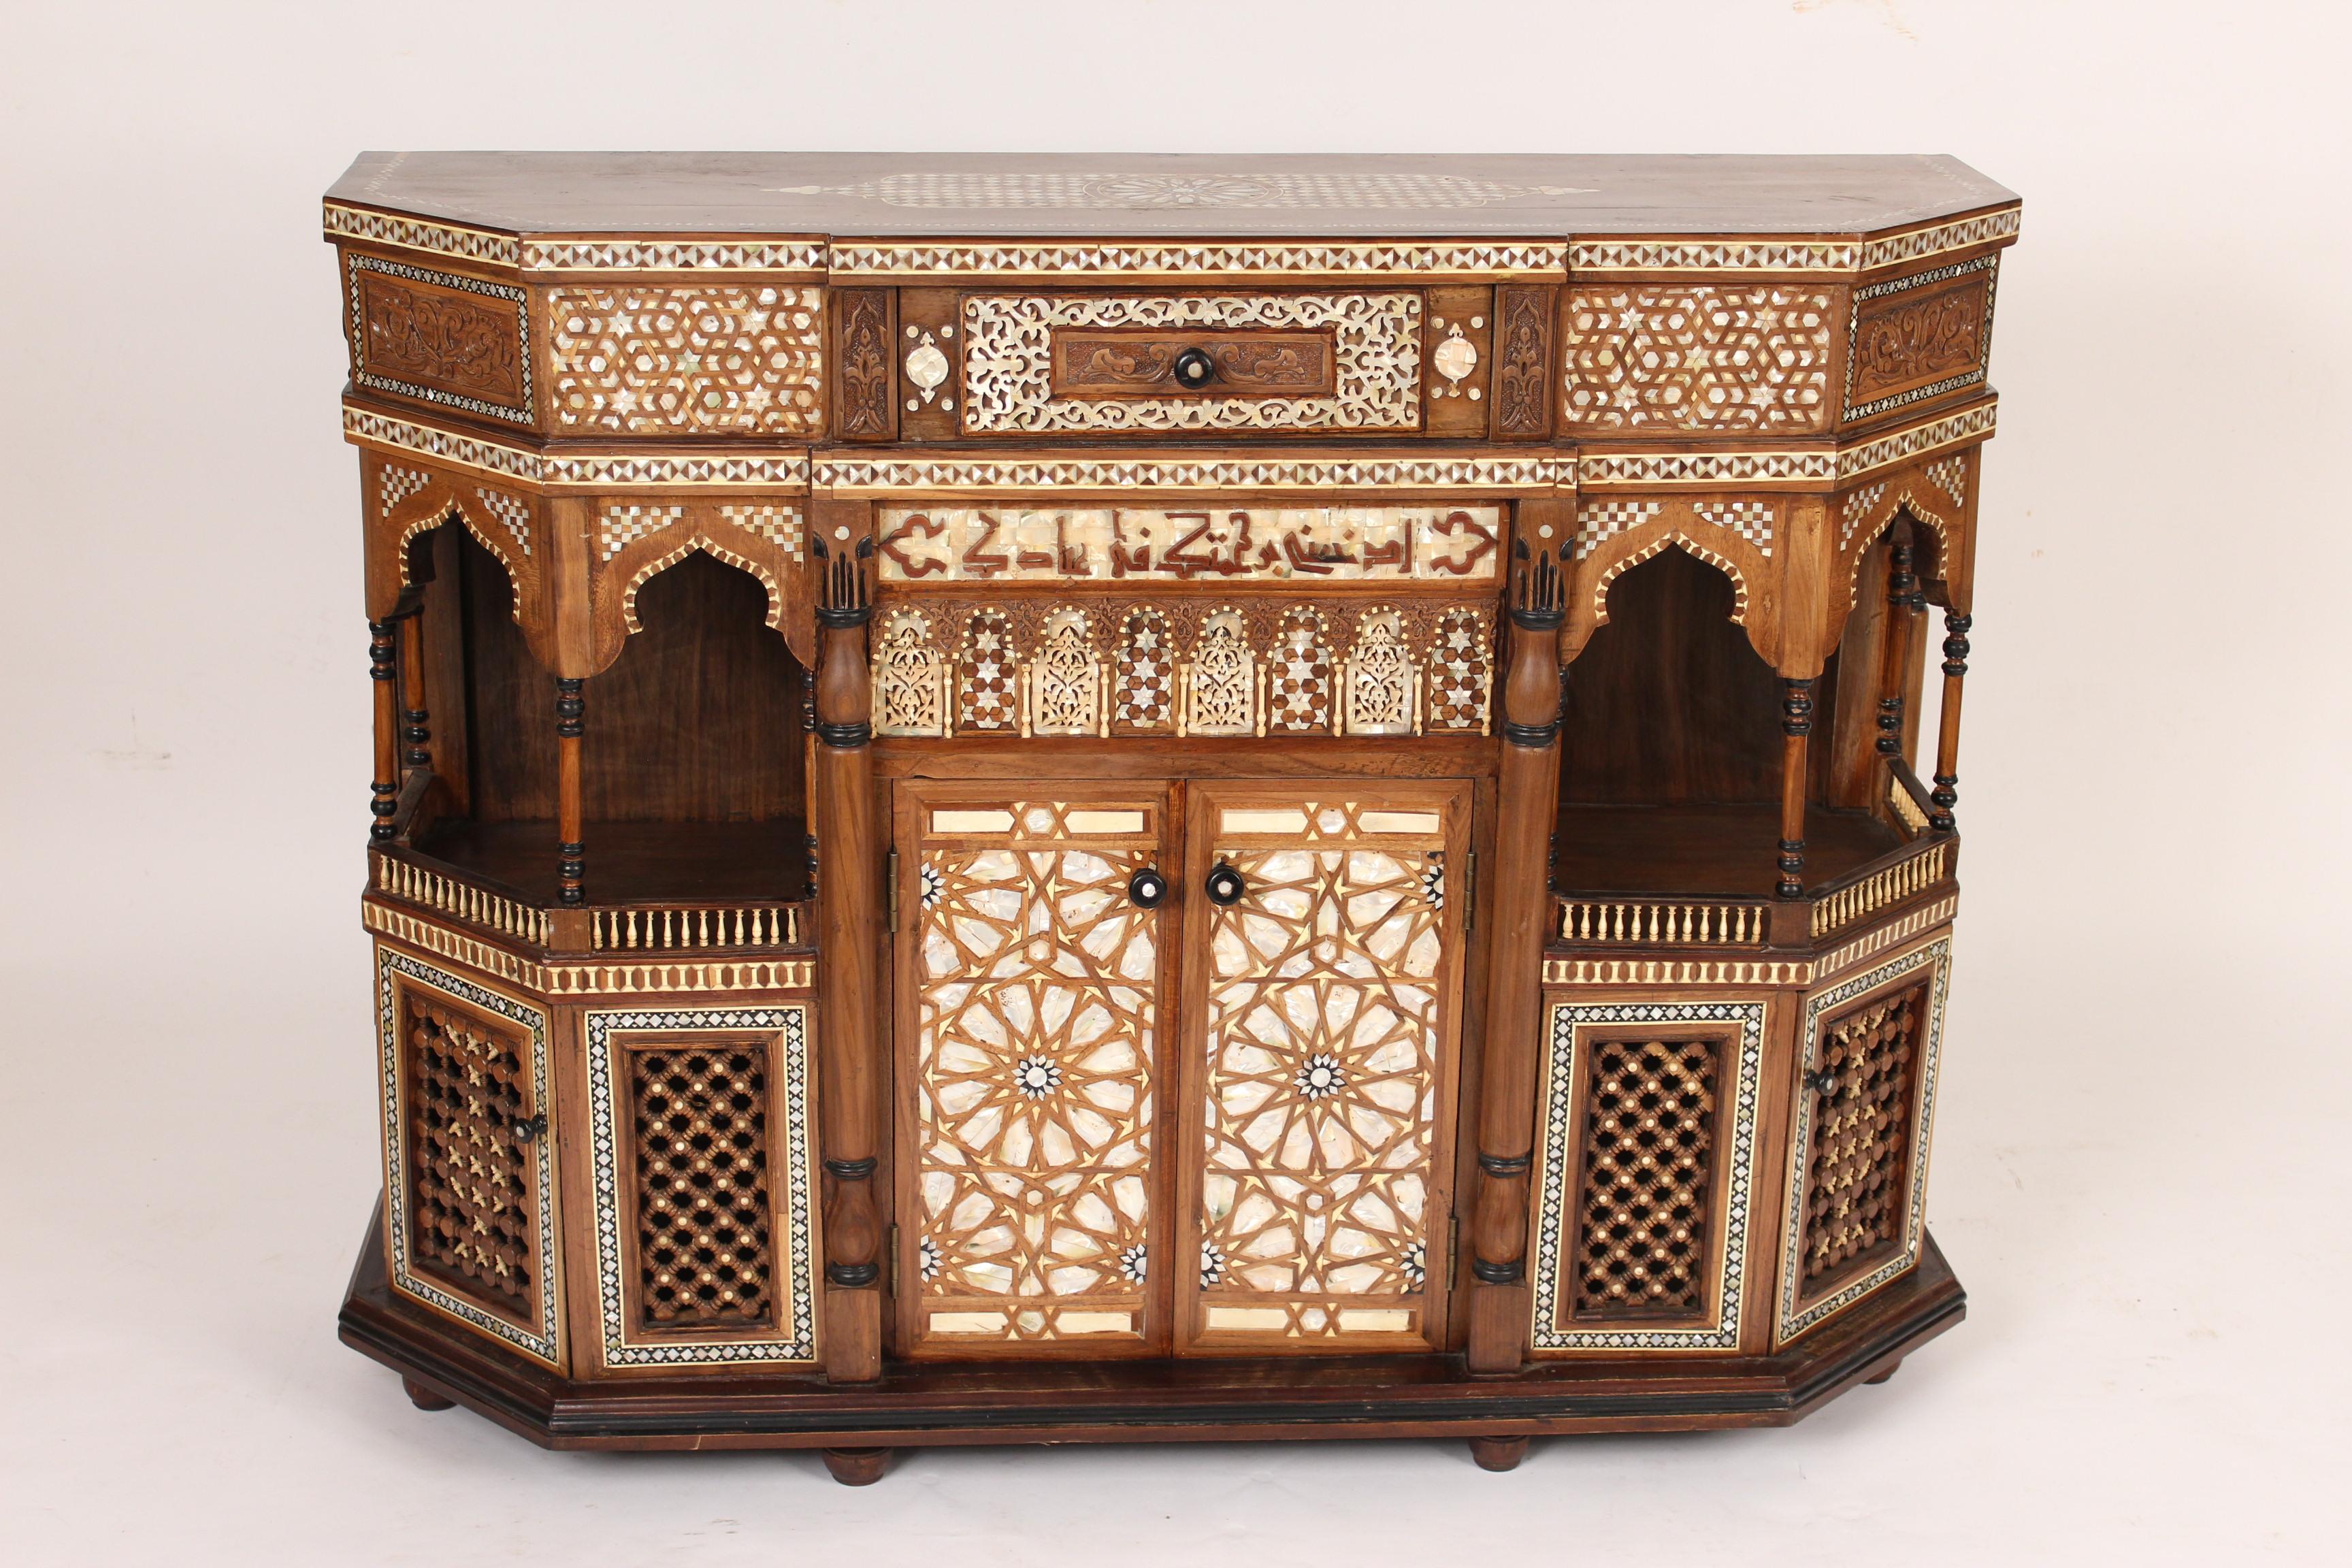 Mother of pearl inlaid and bone Moroccan style cabinet, made in the middle east, early 21st century. The overall dimensions are, height 38.75